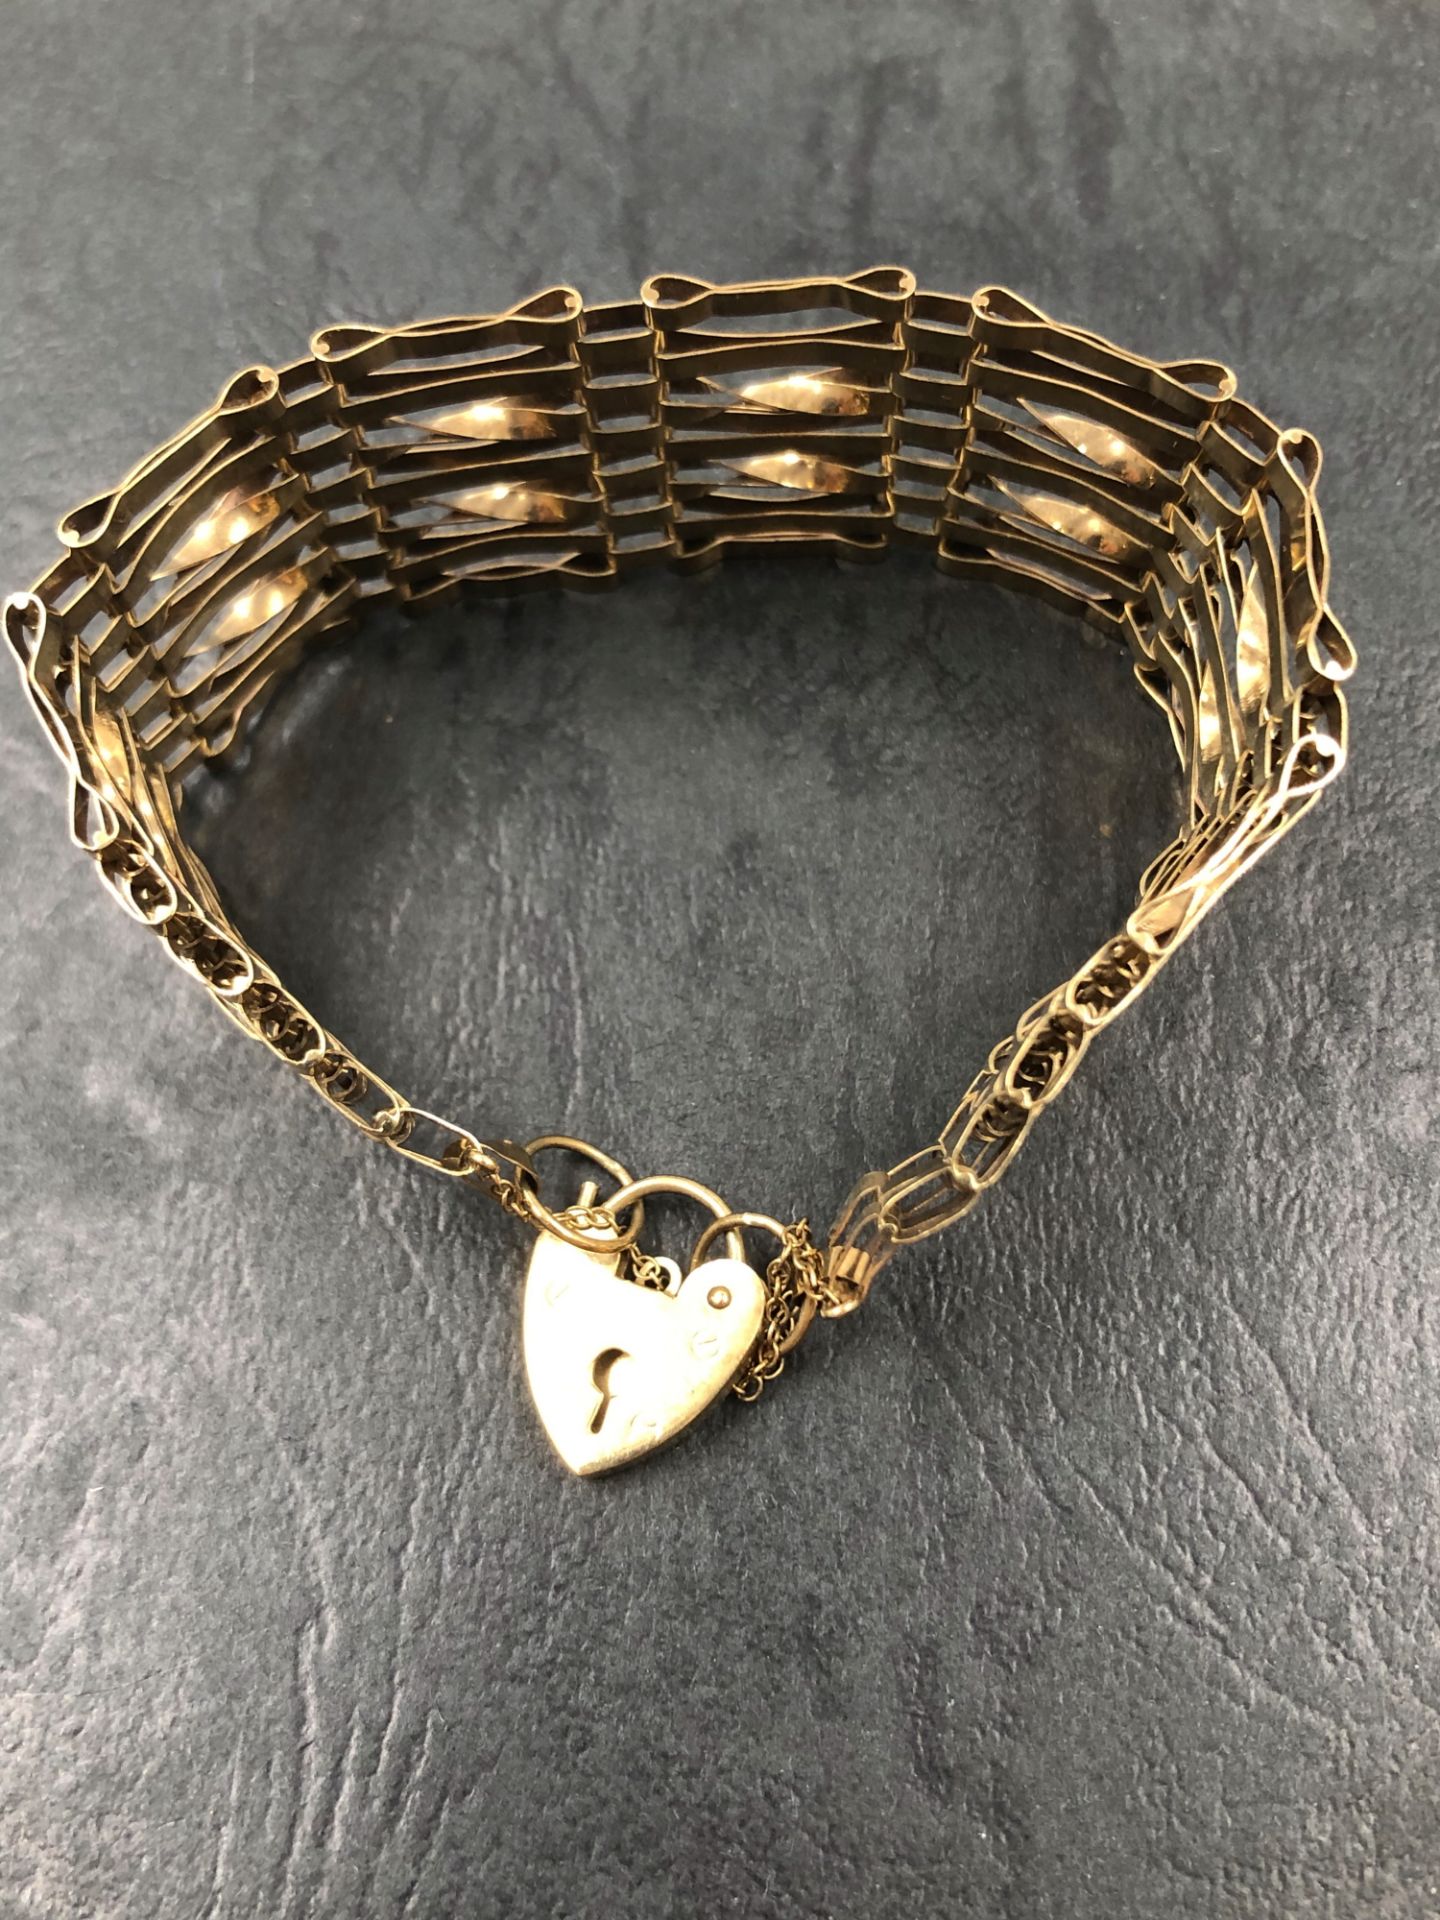 A VINTAGE 9ct HALLMARKED GOLD SEVEN BAR GATE BRACELET, COMPLETE WITH SAFETY CHAIN AND PADLOCK. DATED